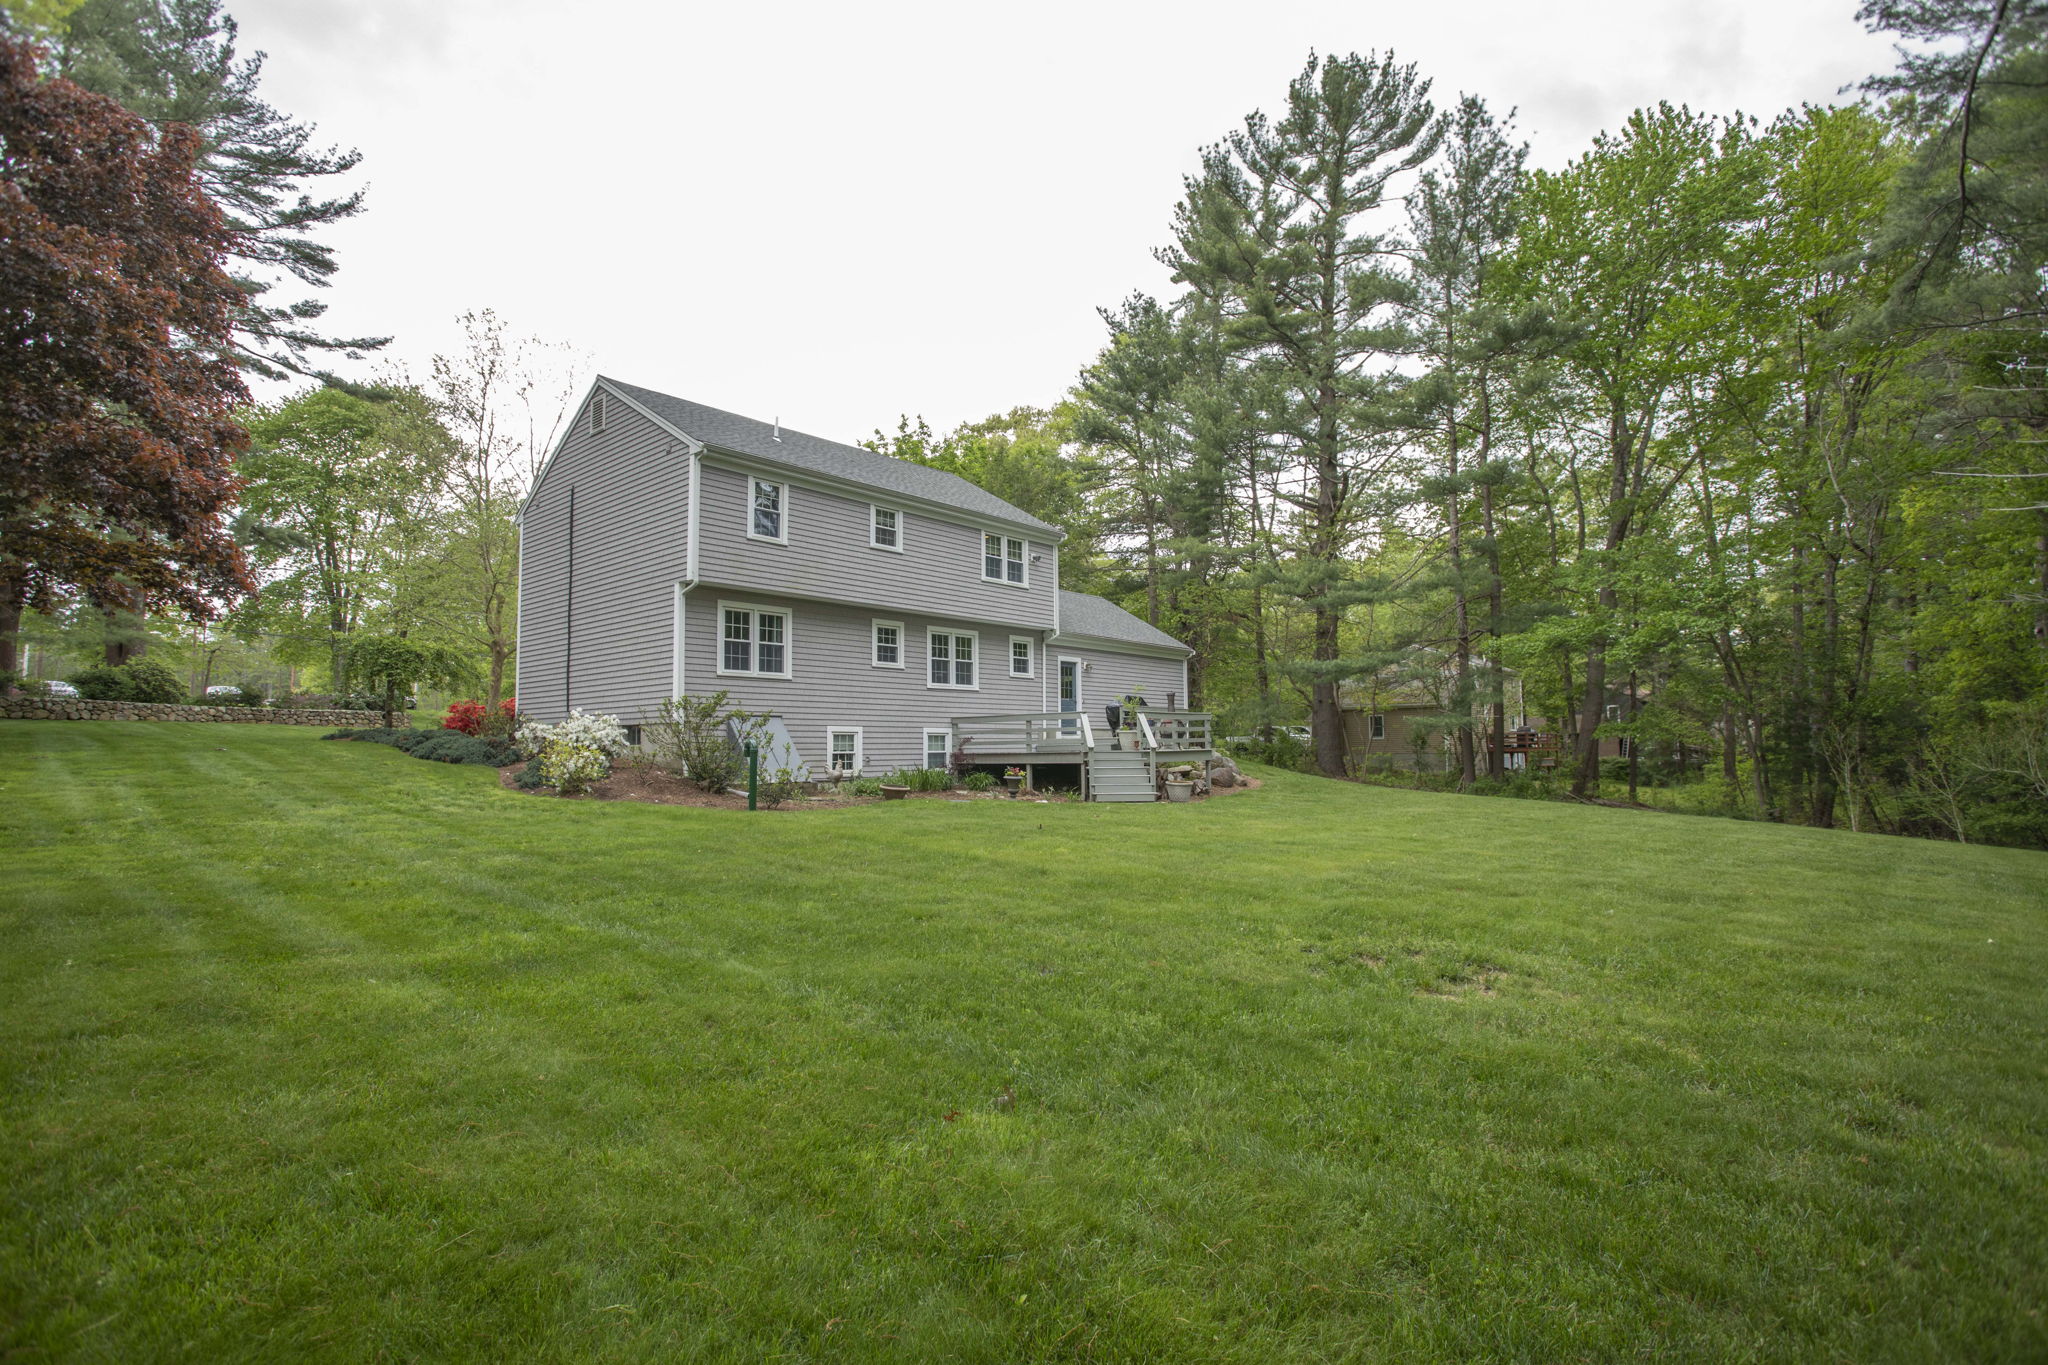  22 Heritage Hill Dr, Lakeville, MA 02347, US Photo 12